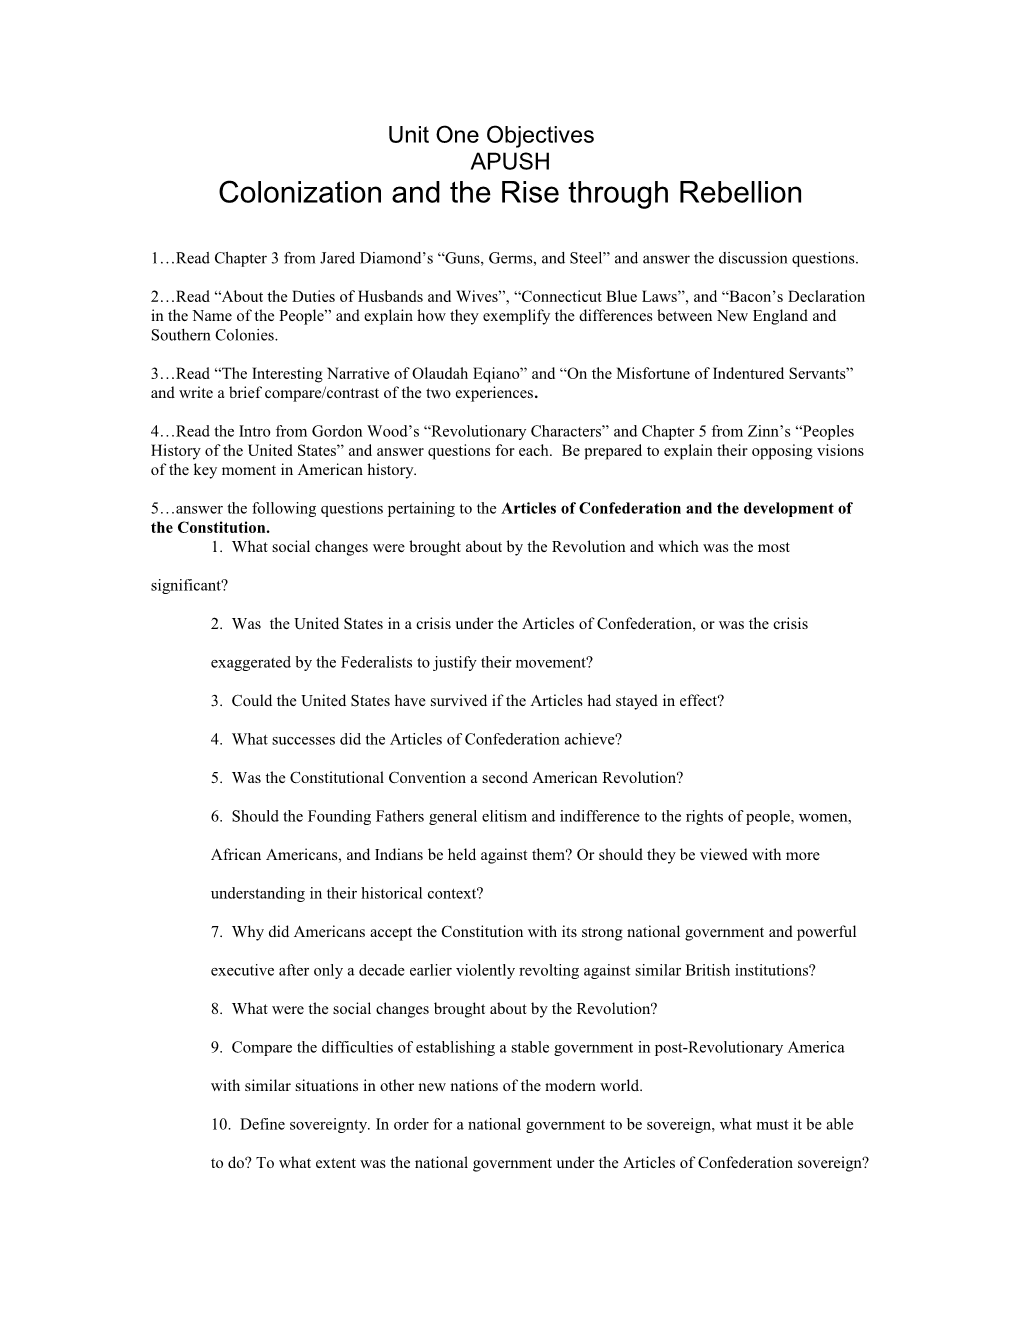 Colonization and the Rise Through Rebellion